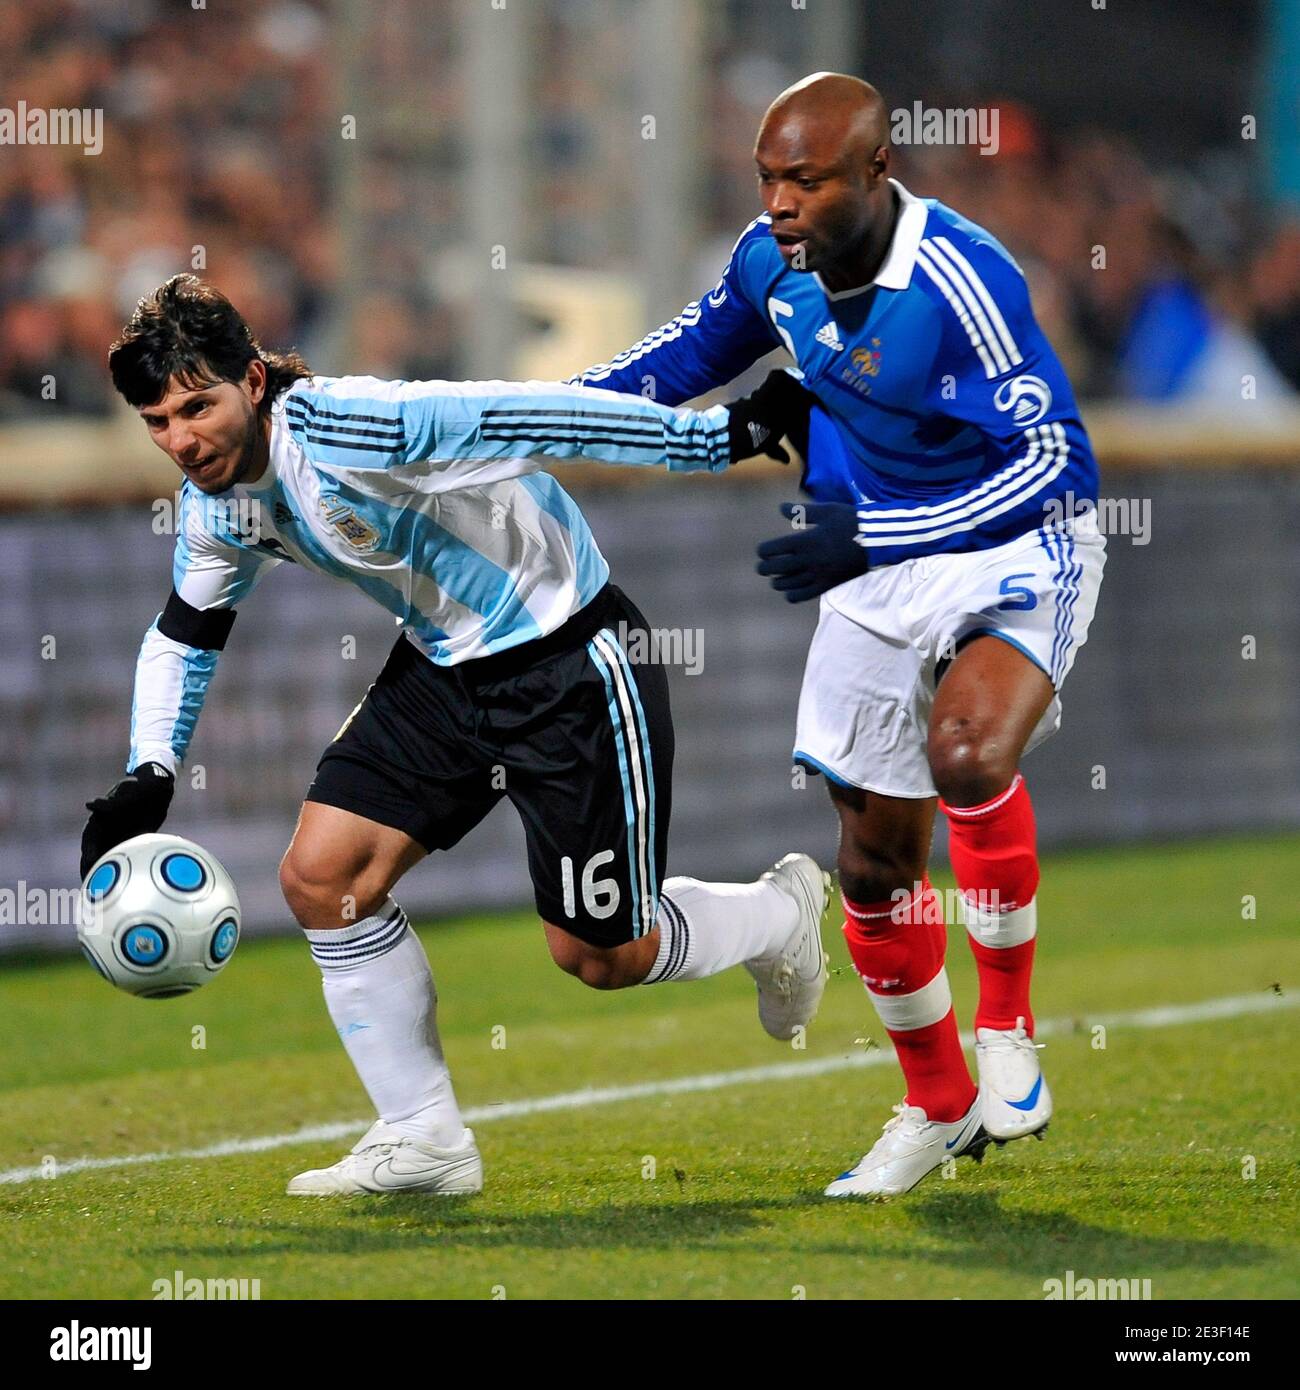 Argentina's Sergio Aguero and France's William Gallas during the International Friendly Soccer match, France vs Argentina at the velodrome Stadium in Marseille, France on February 11, 2009. Argentina won 2-0. Photo by Stephane Reix/ABACAPRESS.COM Stock Photo